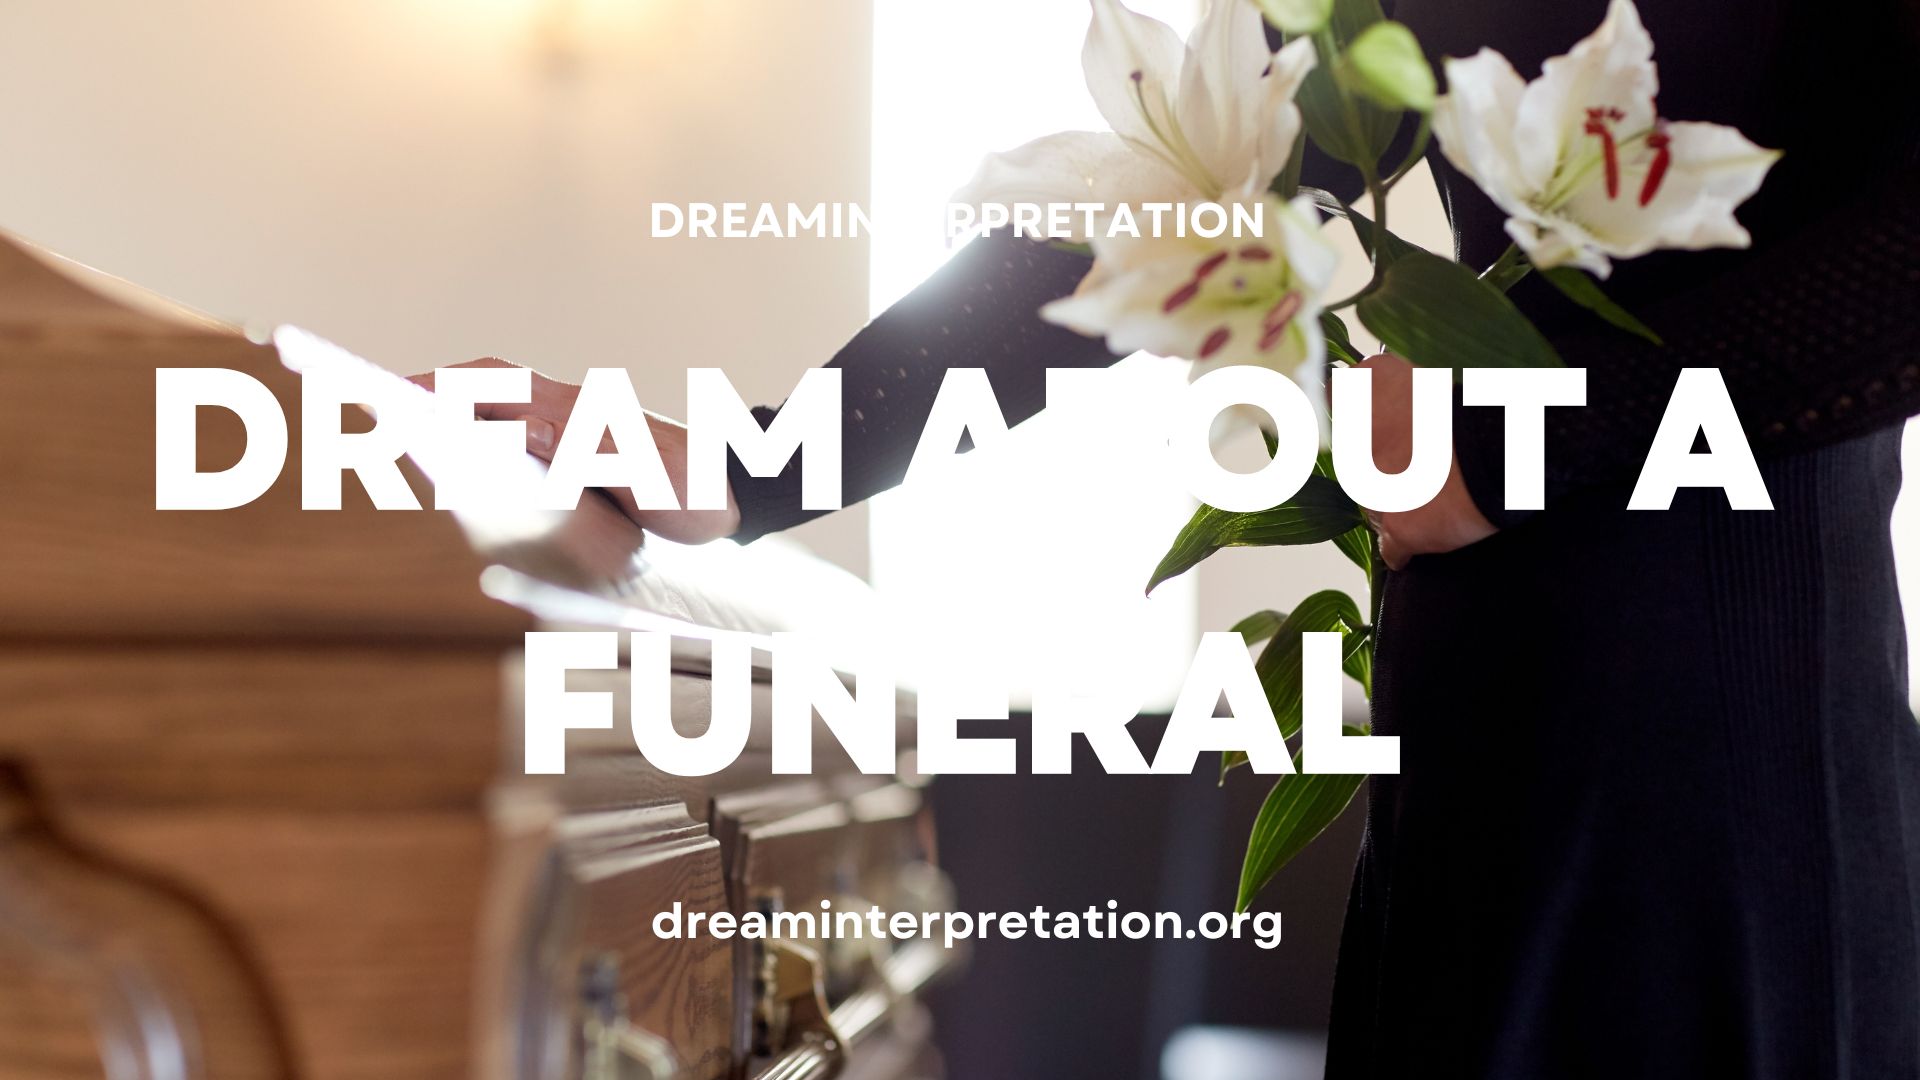 Dream About a Funeral